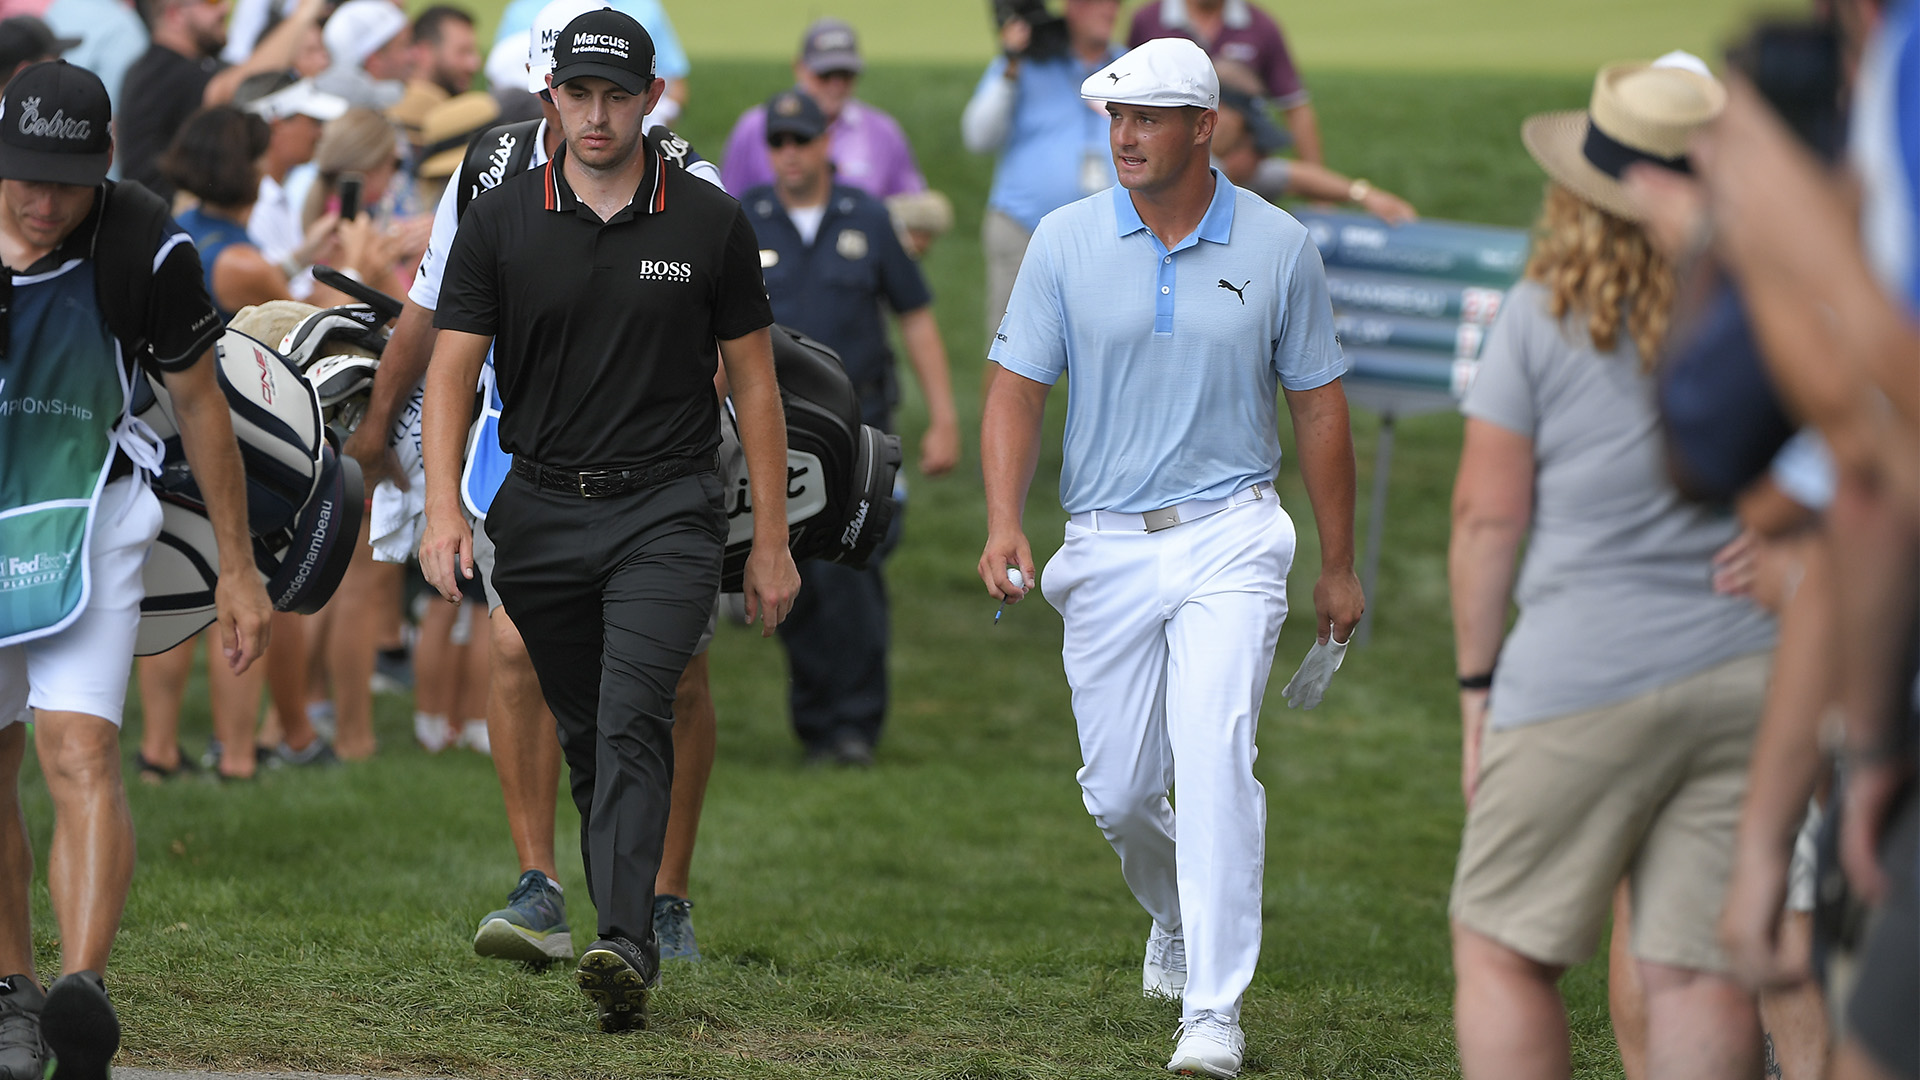 Tradition (Cantlay) Conquers Disruption (DeChambeau) At BMW